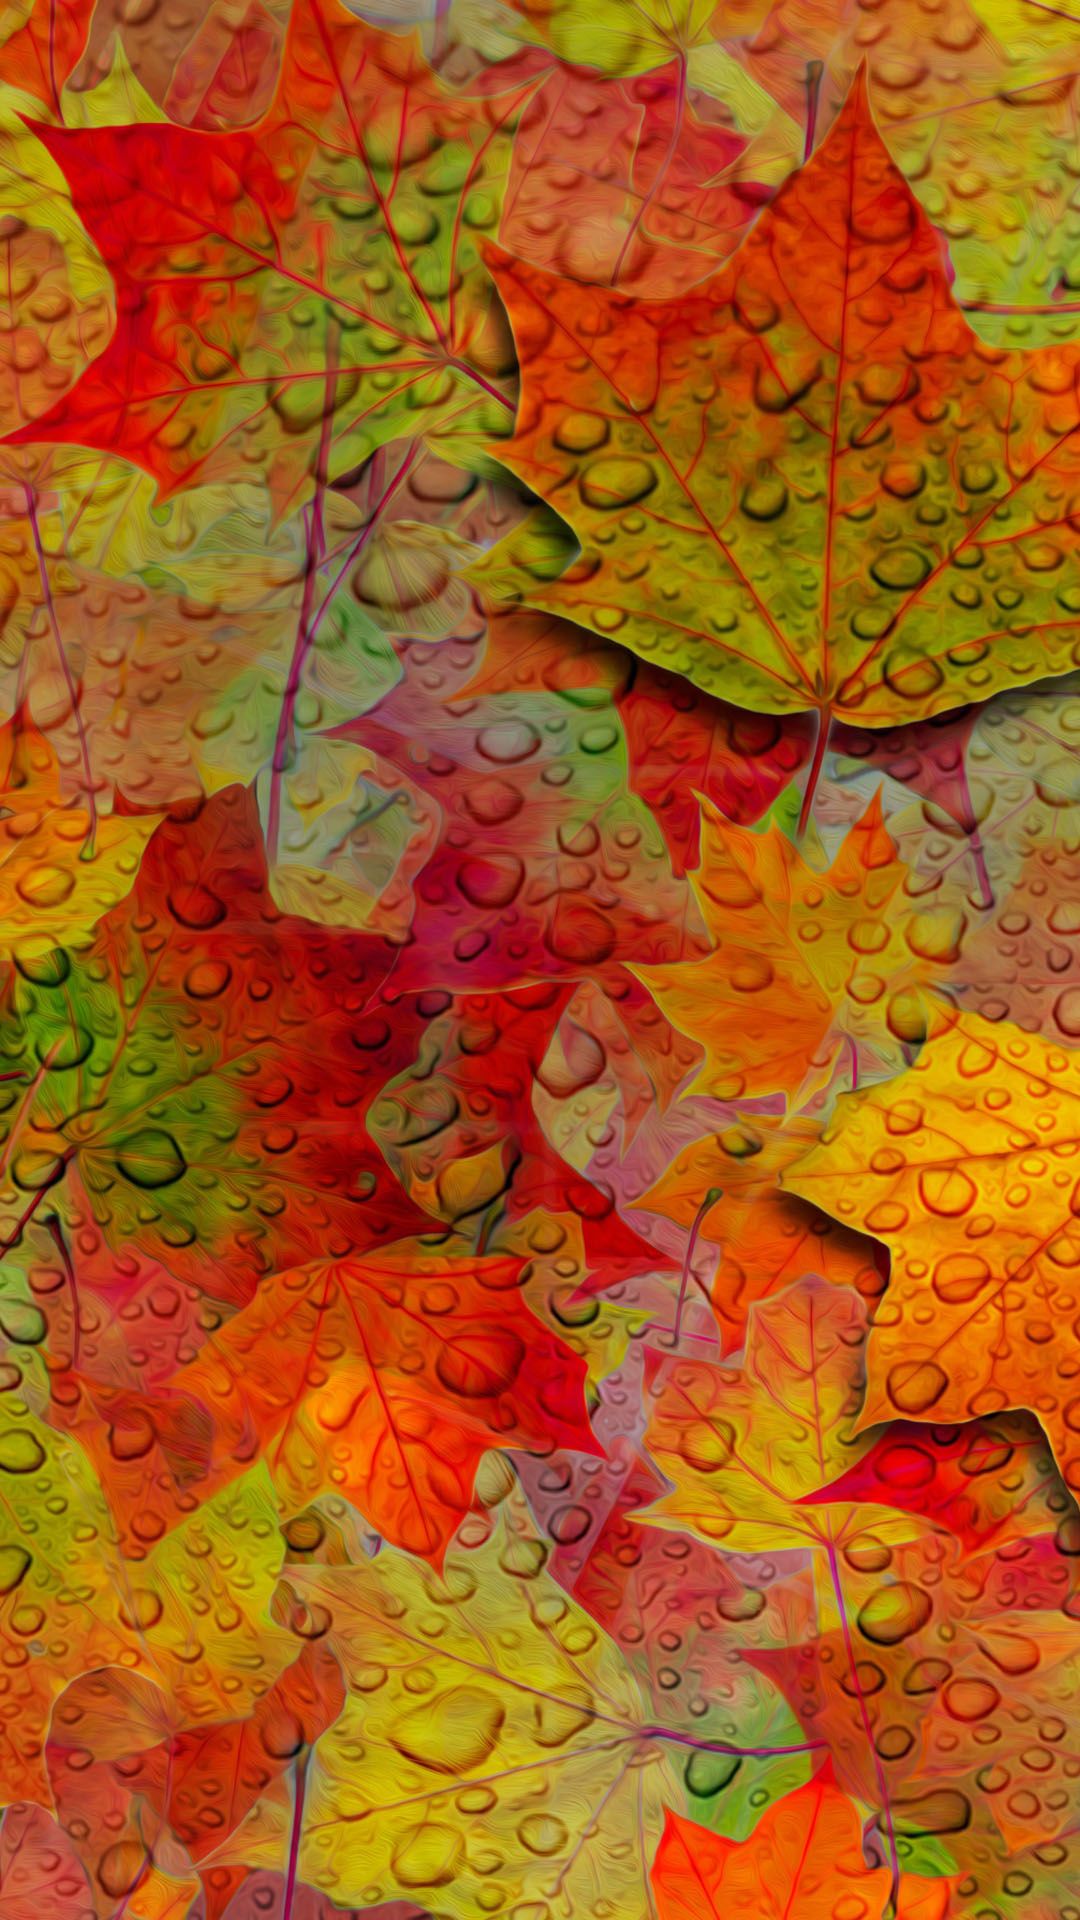 Fall HD Leaves Wallpaper For iPhone